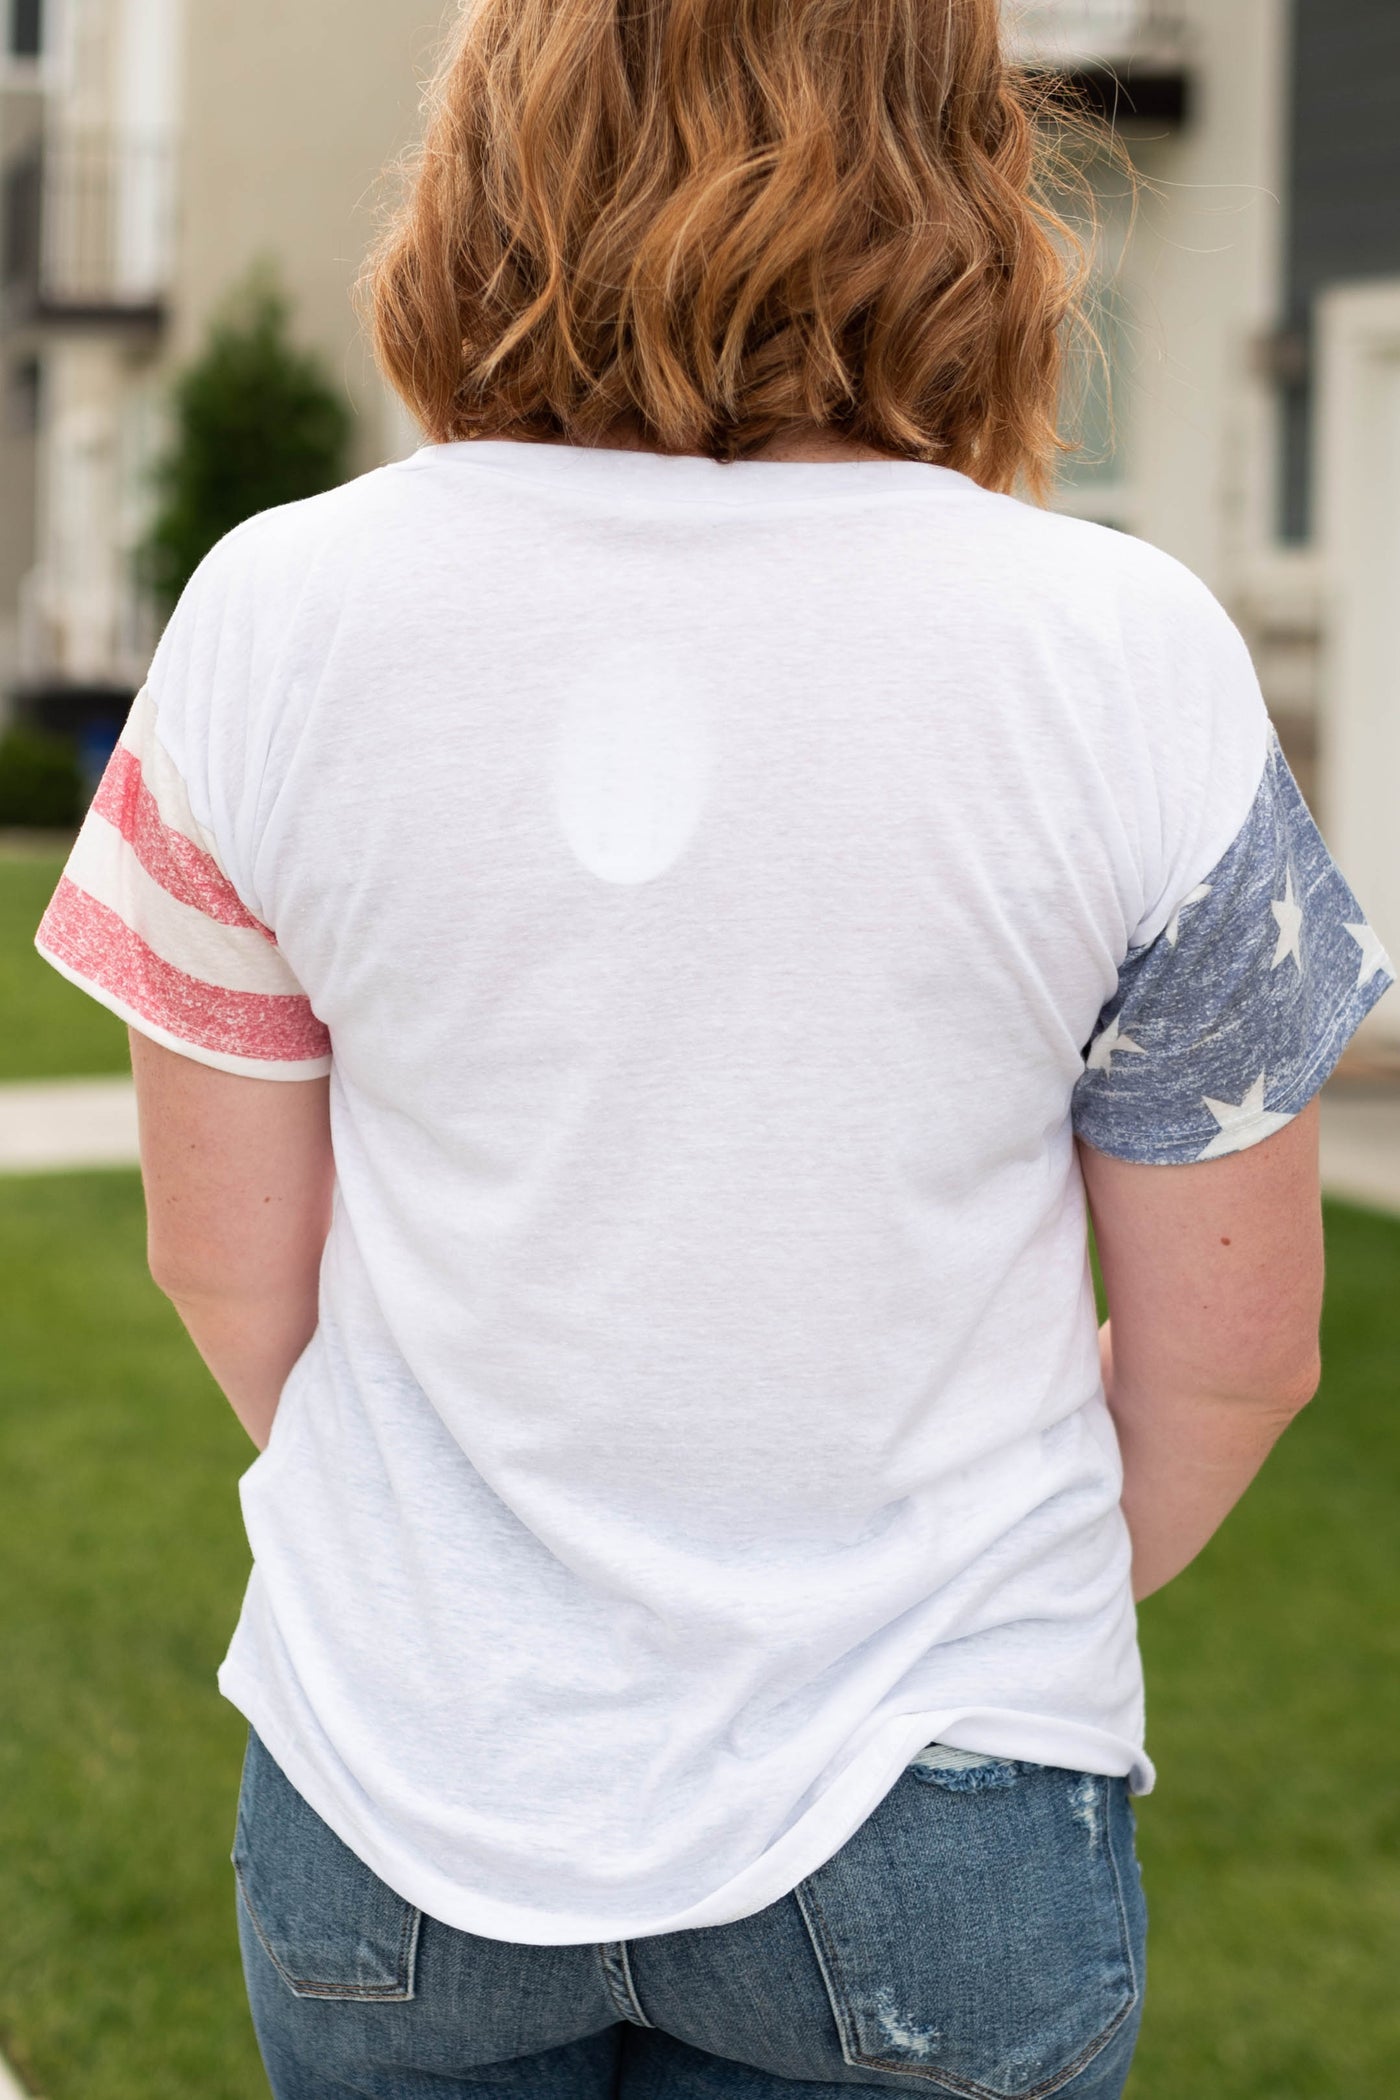 Short sleeve white top with stars and stripes on sleeves